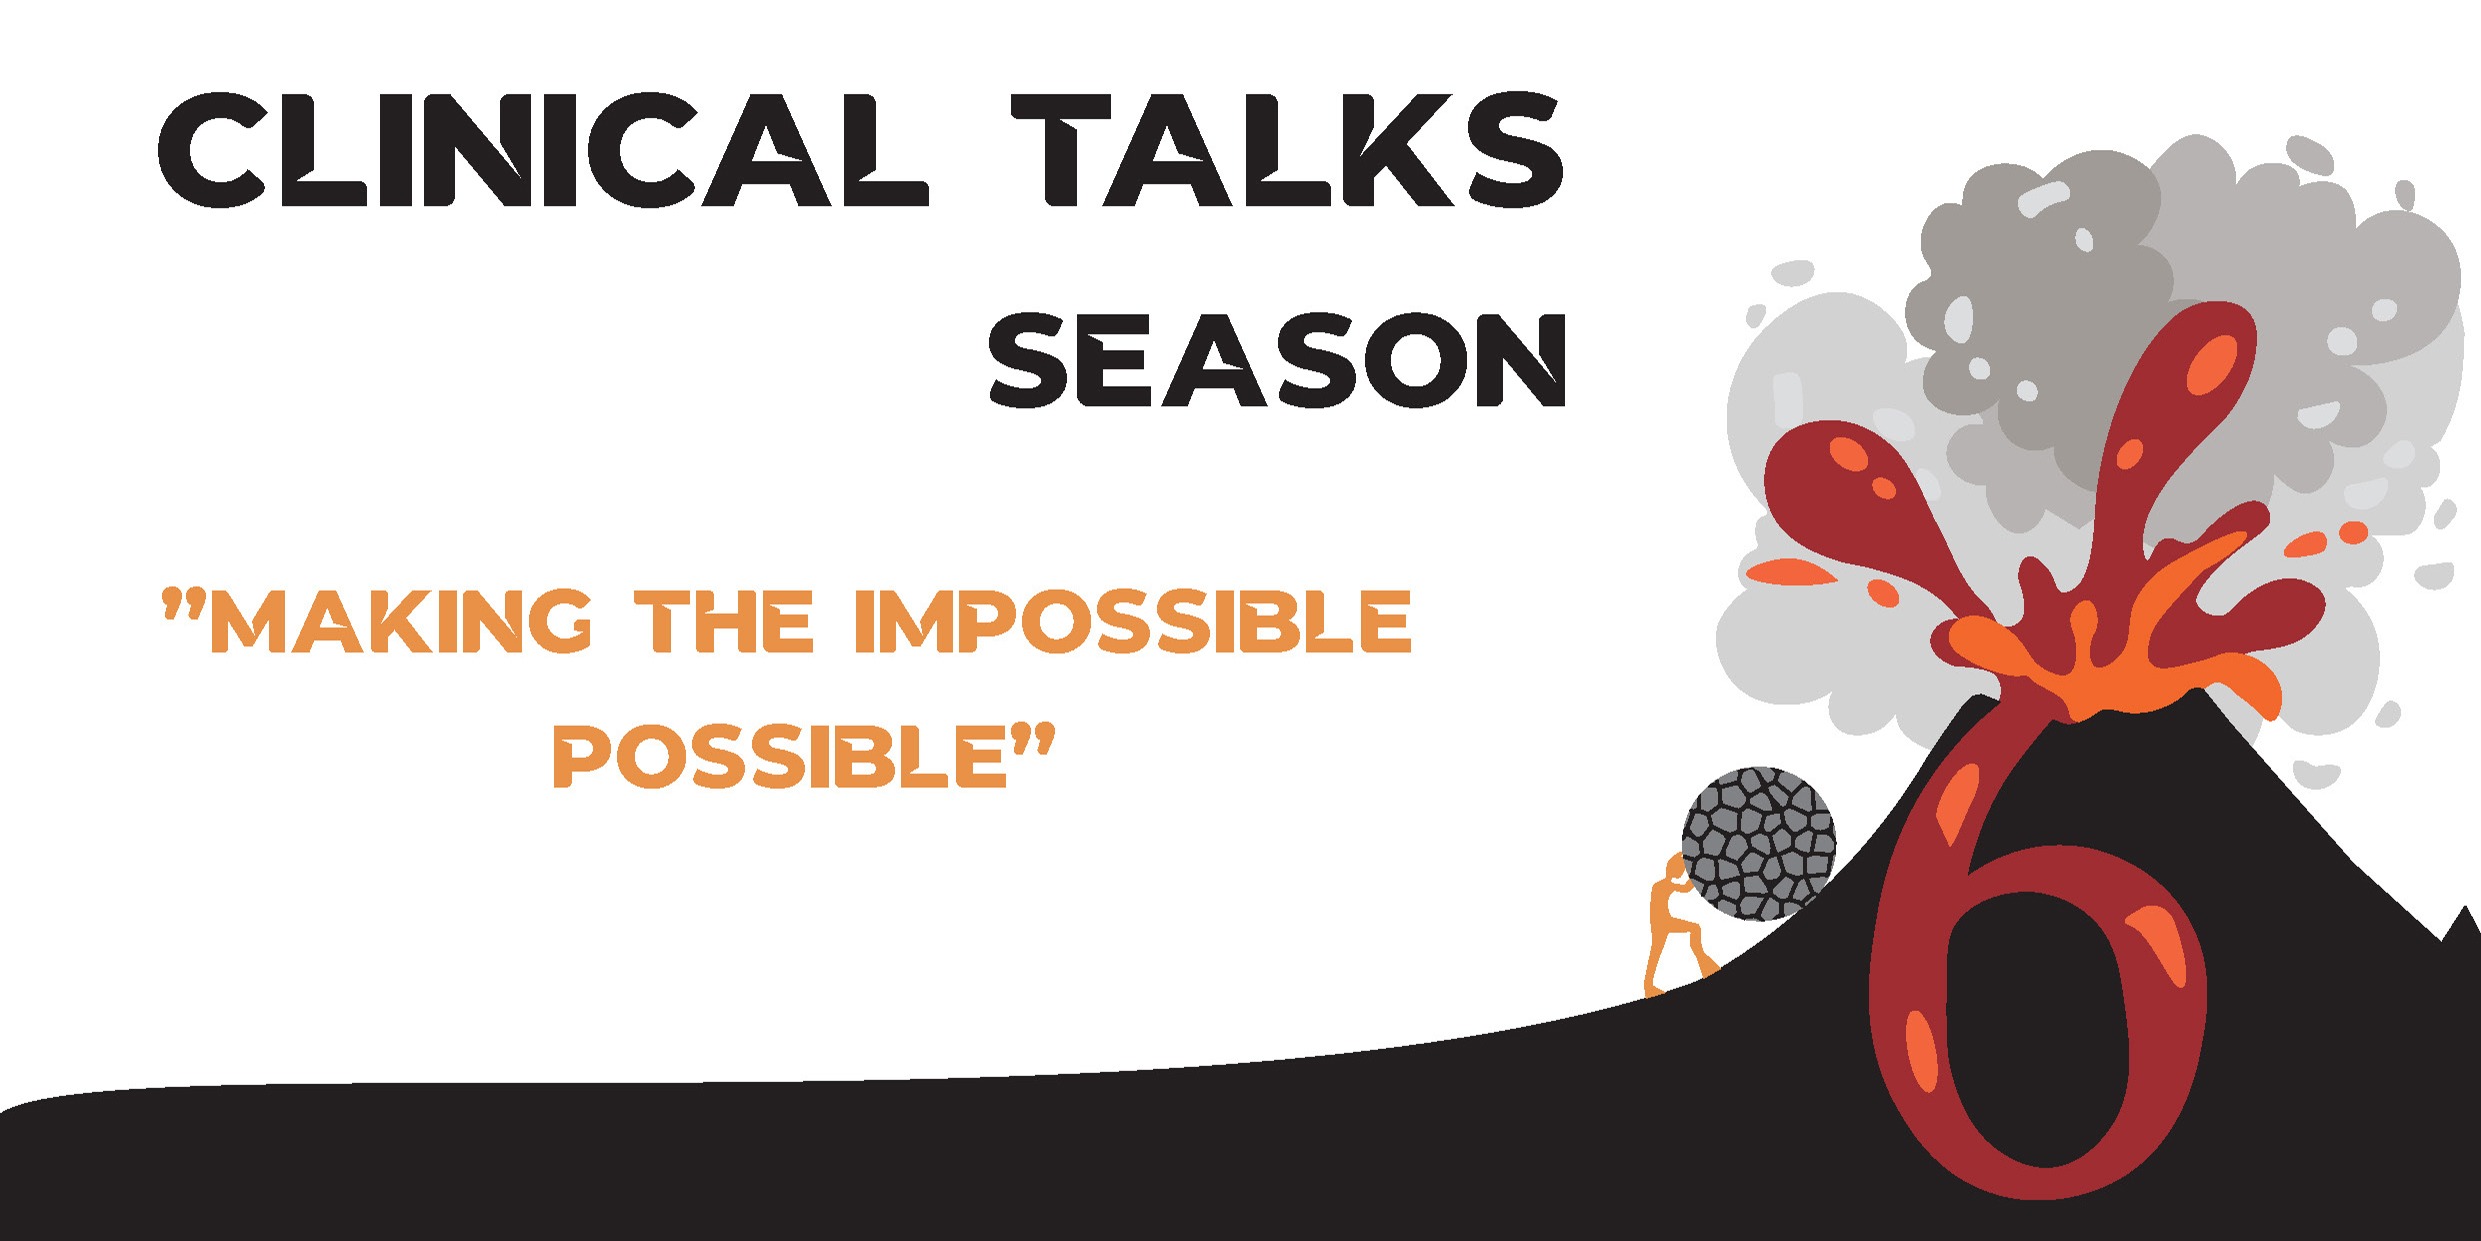 Clinical talks season 6 – making the impossible possible